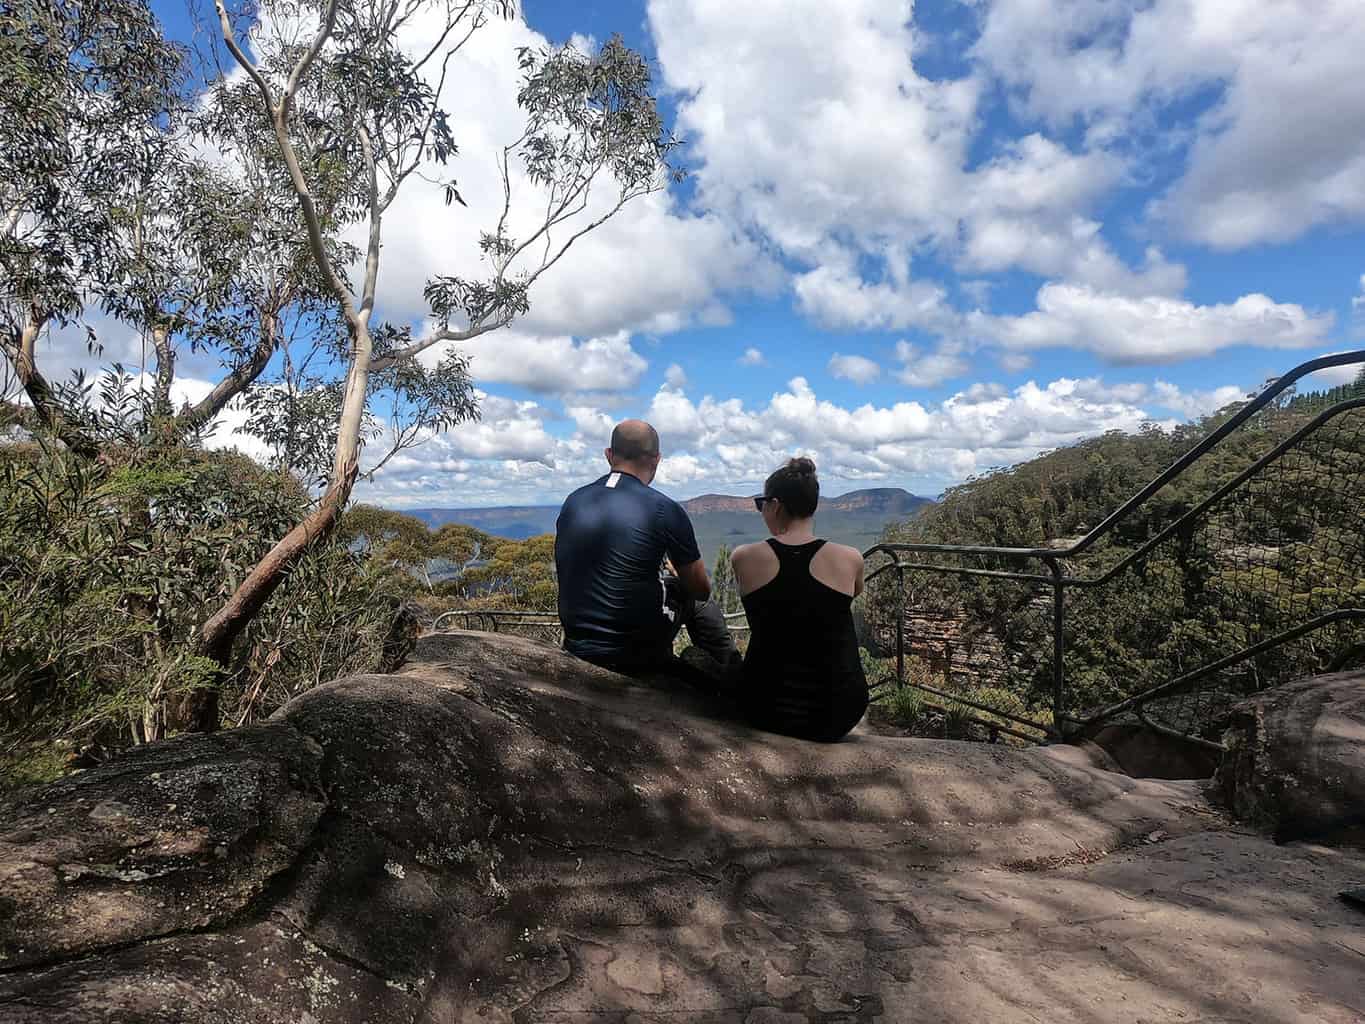 Admiring the view of thick green forest over the Blue Mountains National Park from a shady spot along the Prince Henry cliff walk